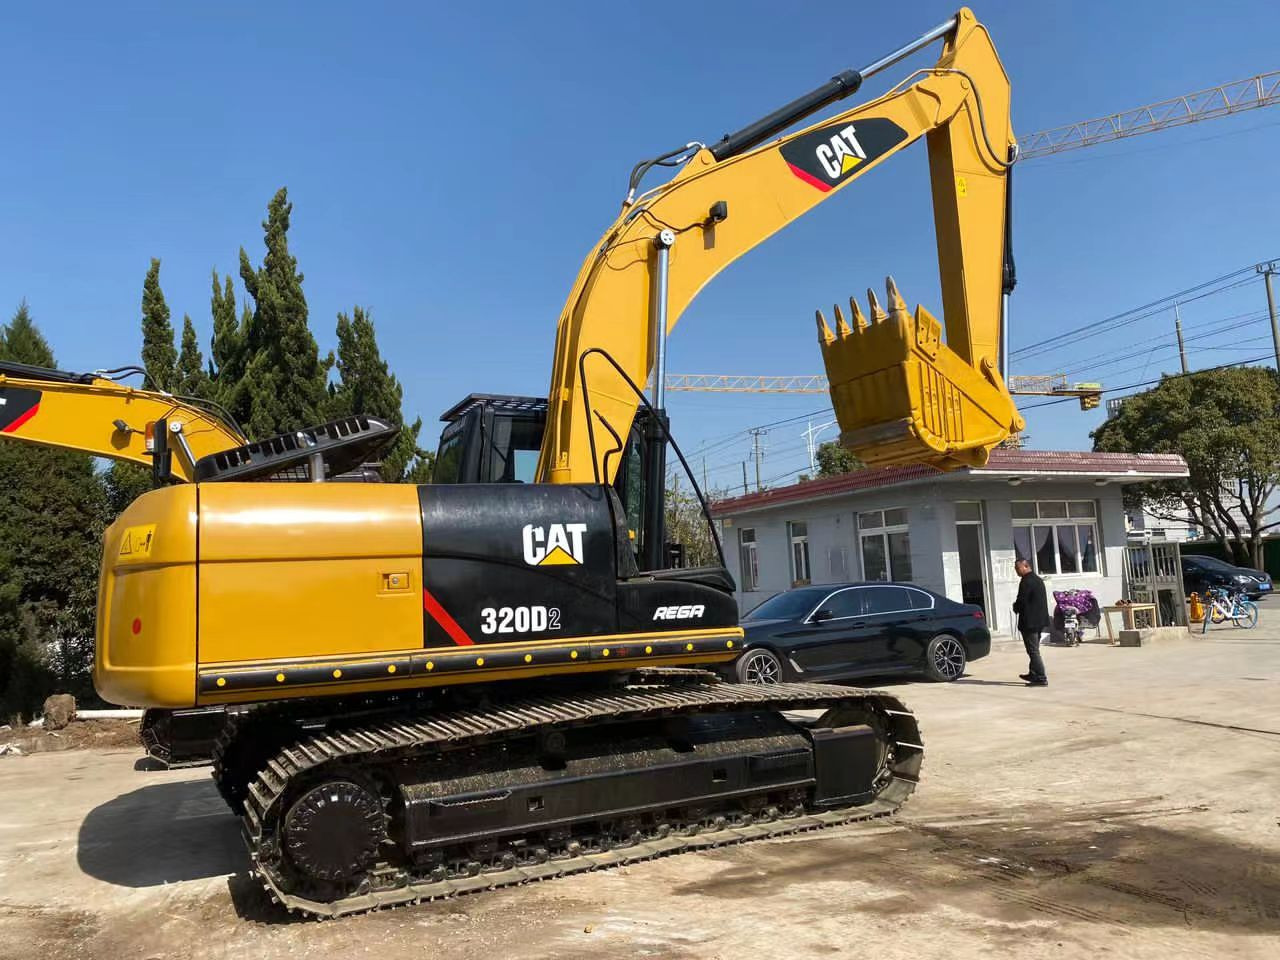 Lintekskavaator used excavator CATERPILLAR 320D2 original design and perfect service welcome to inquire: pilt 3